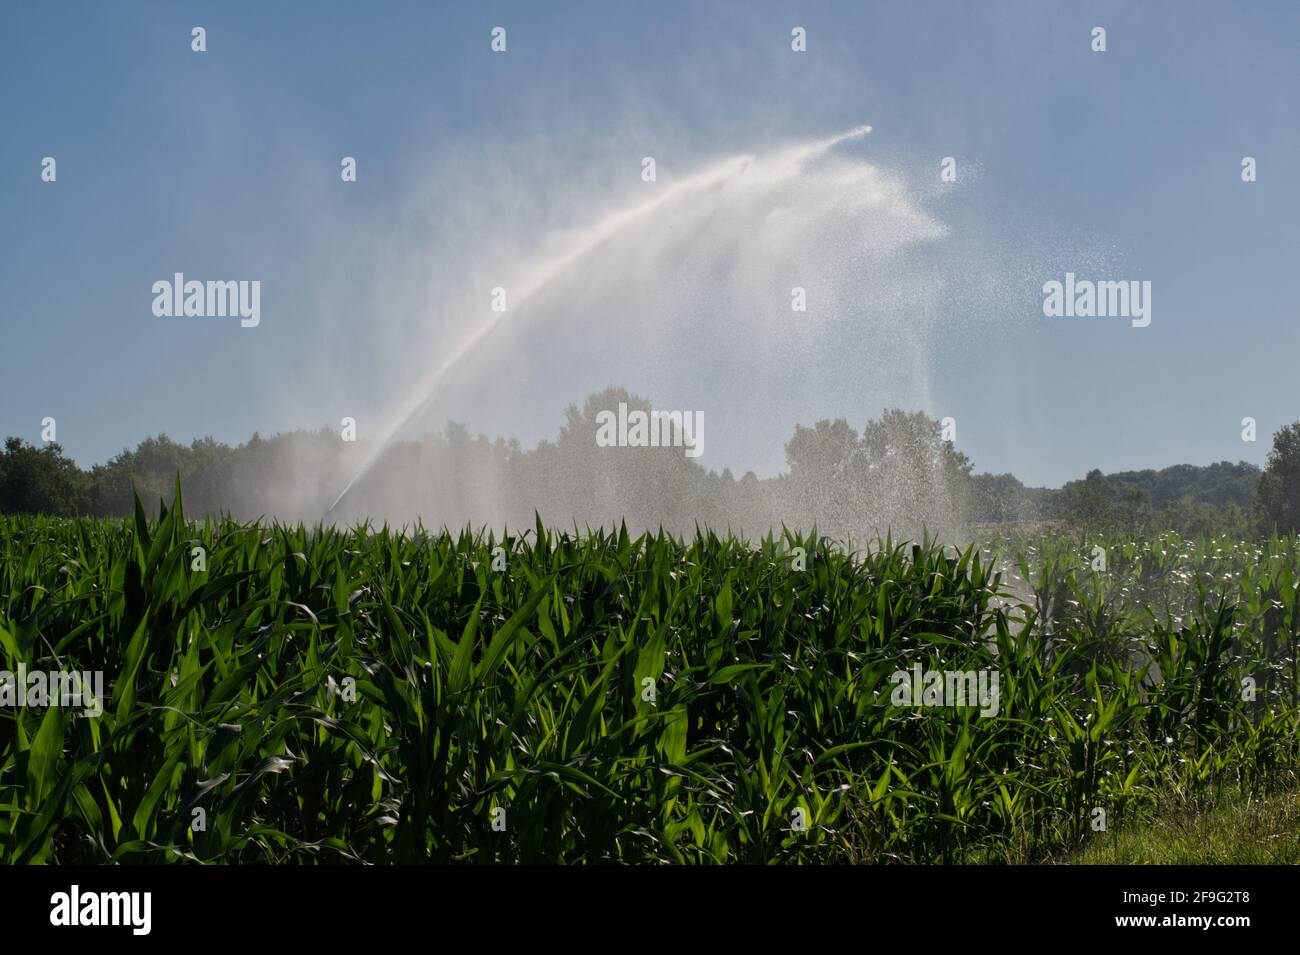 Hose reel travelling irrigation system irrigating a maize field in the Lot-et-Garonne, SW France. Stock Photo